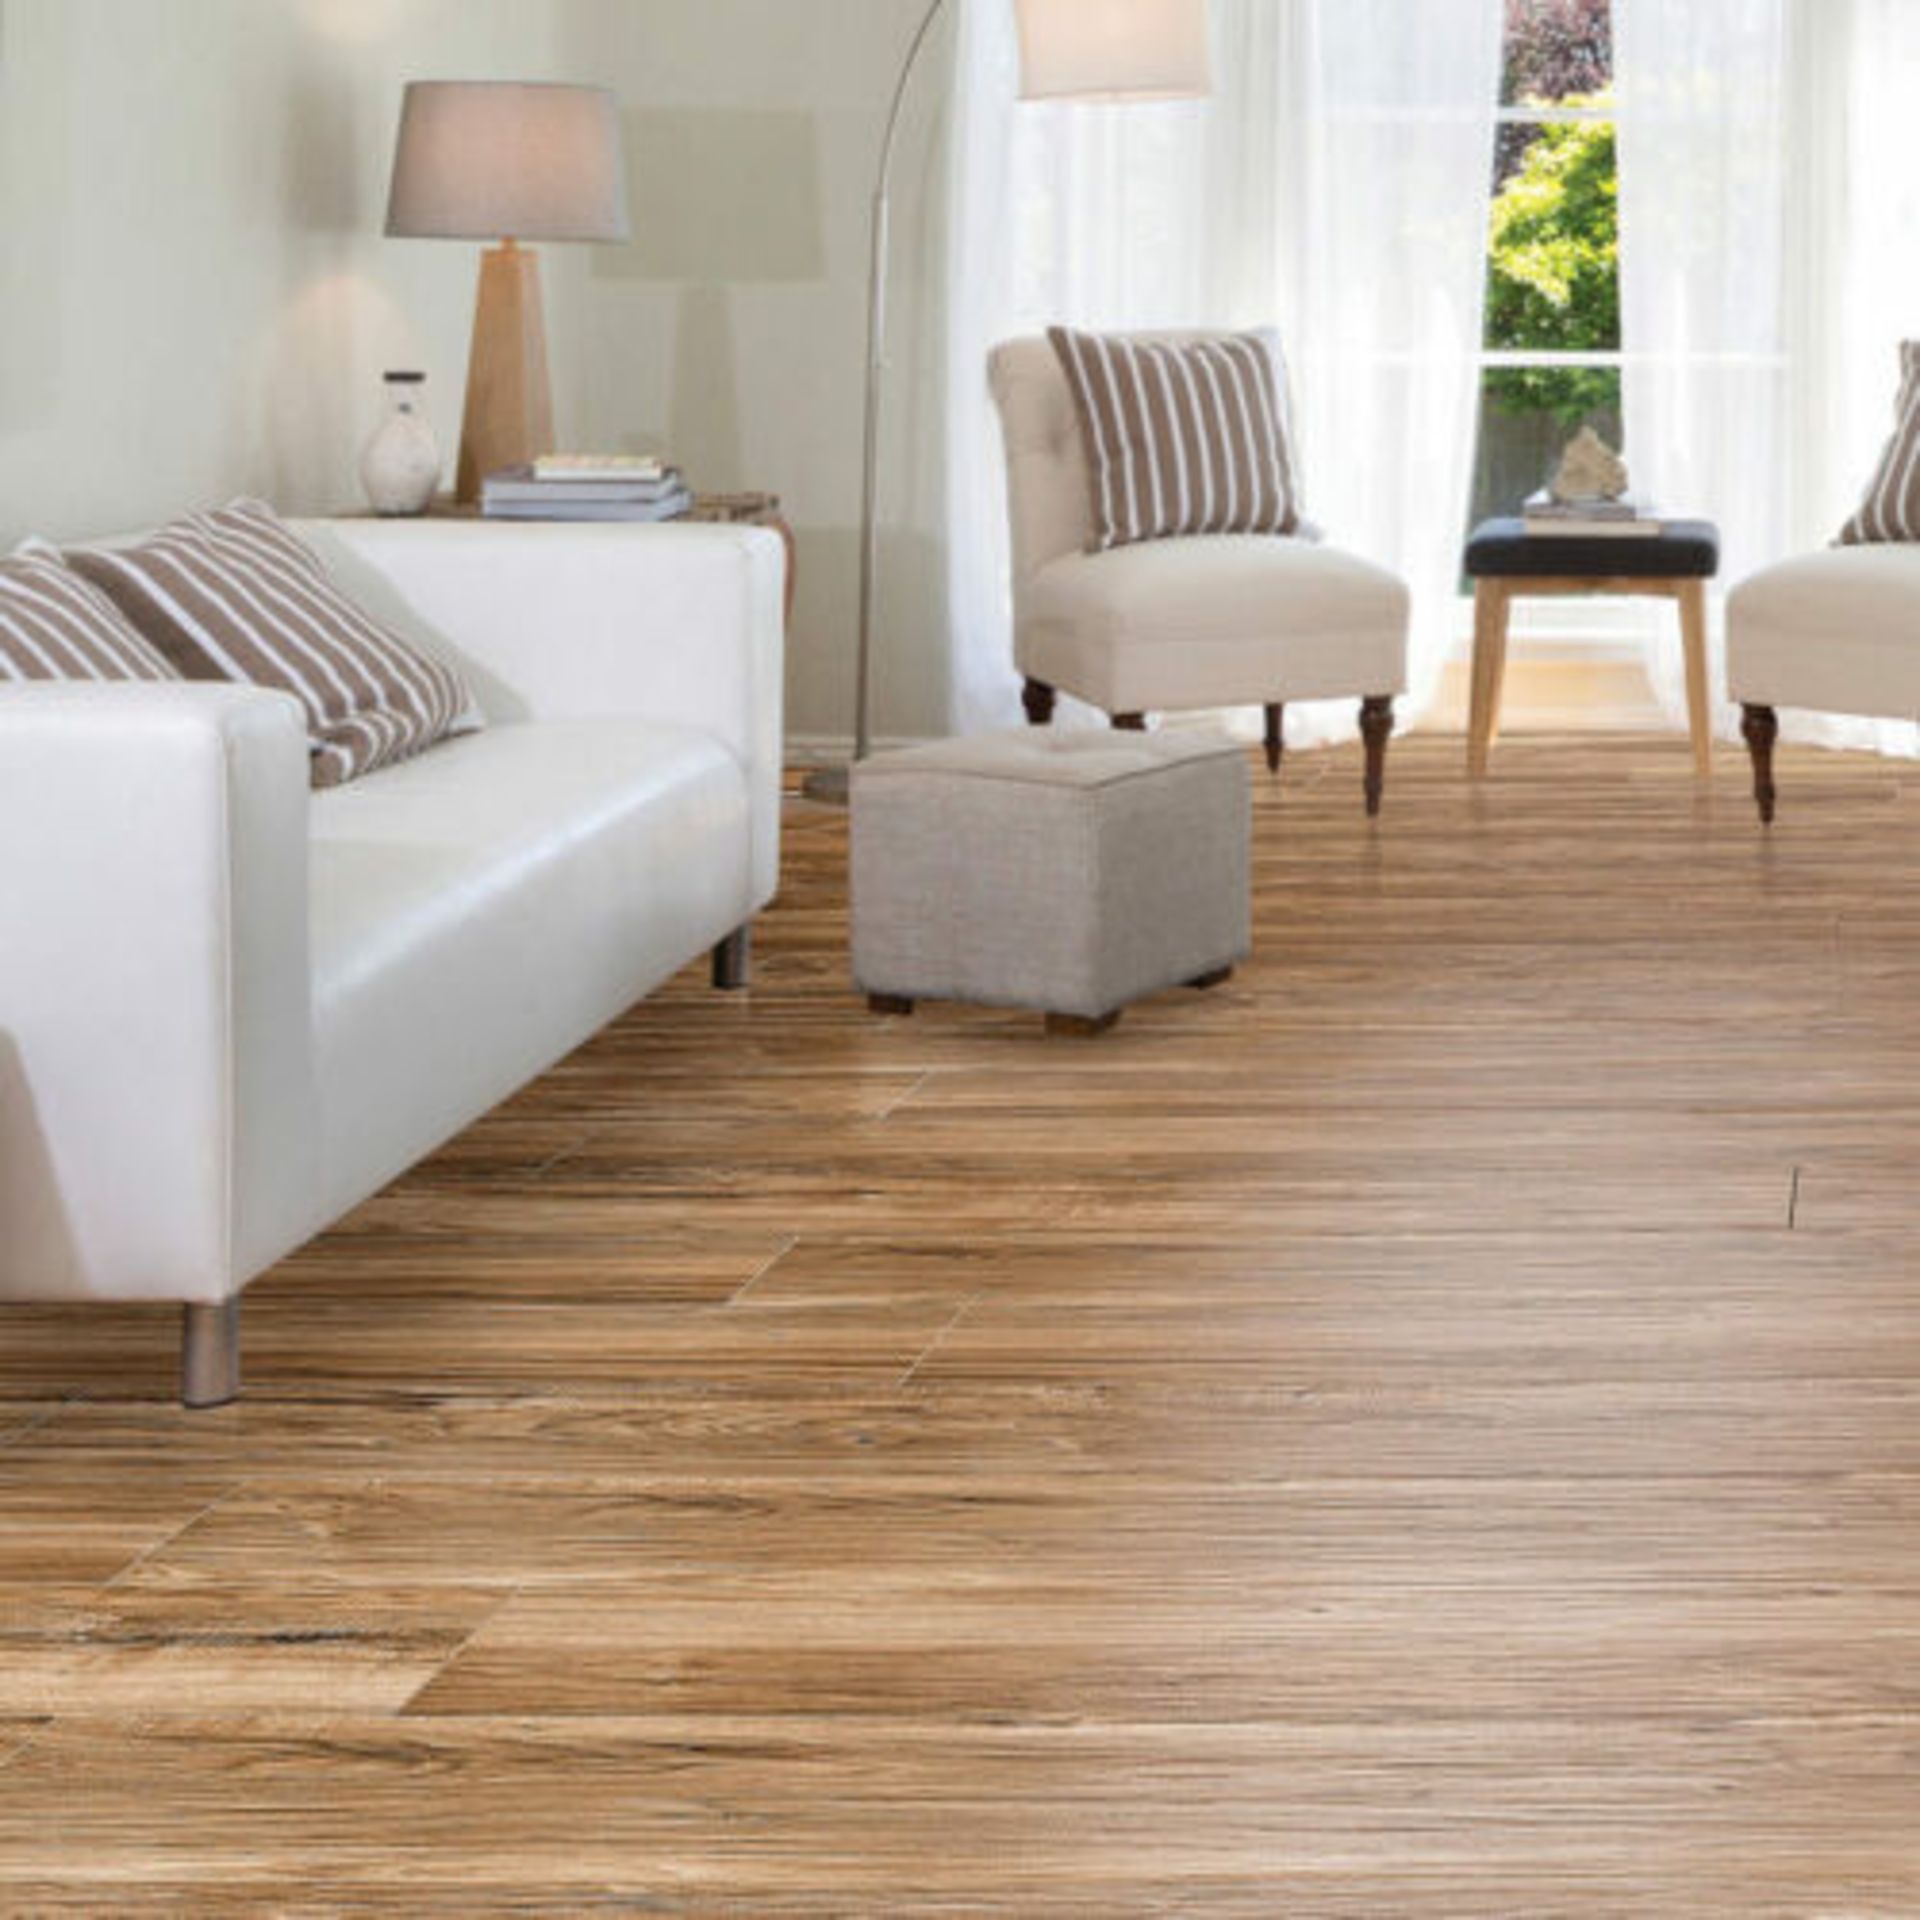 1 BOXED GOLDEN SELECT LAMINATE FLOORING IN TOLEDO WALNUT (COVERS APPROXIMATELY 1.162m2 PER BOX)